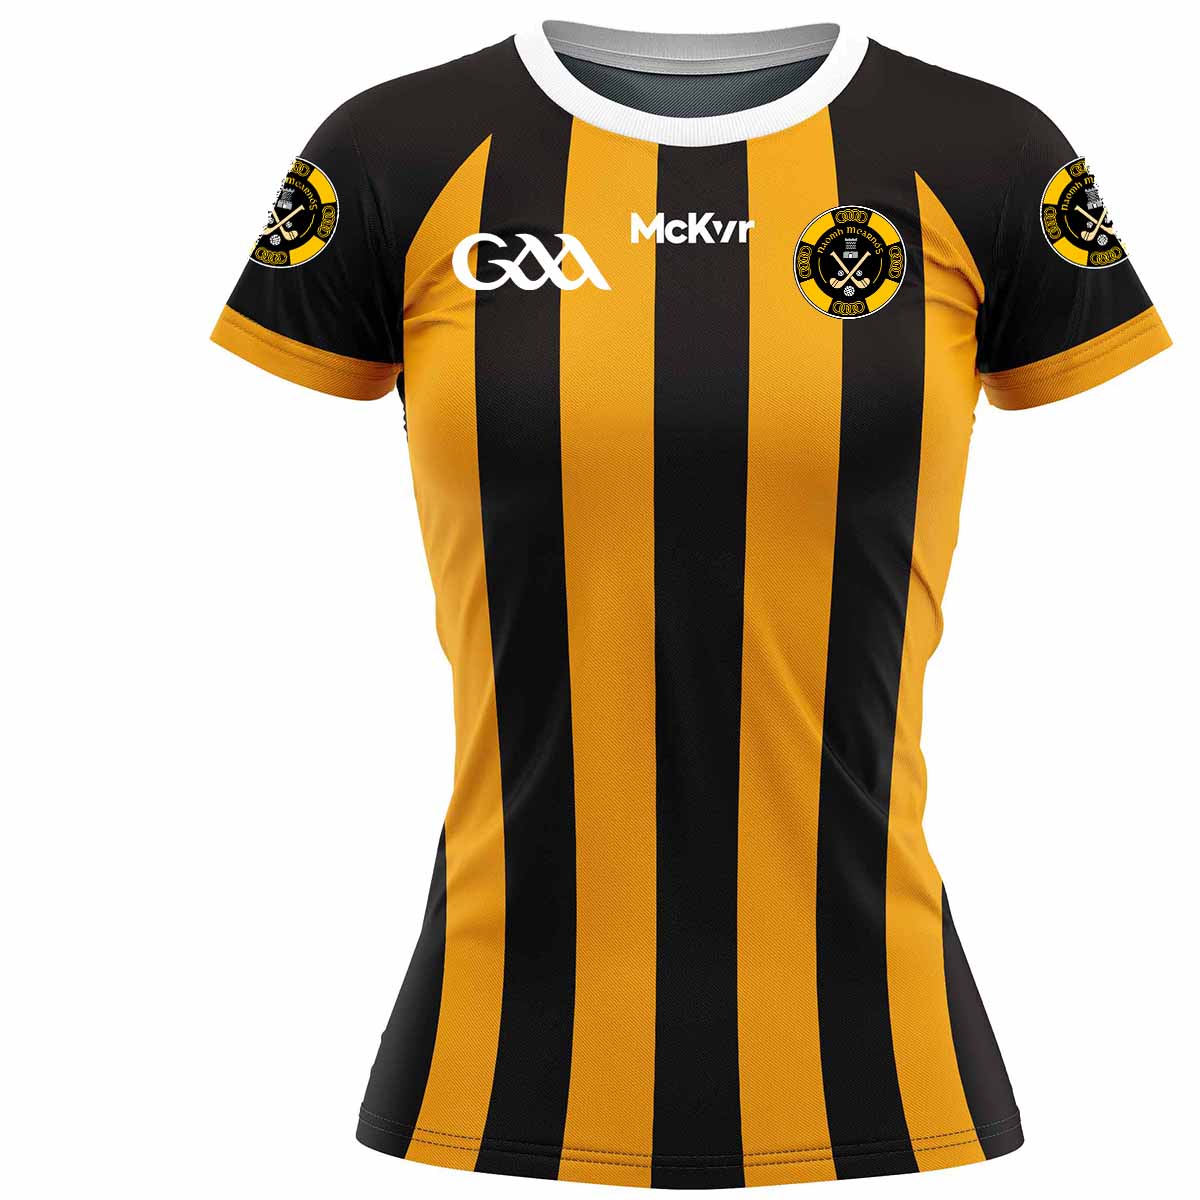 Mc Keever Naomh Mearnog CLG Playing Jersey - Womens - Black/Amber